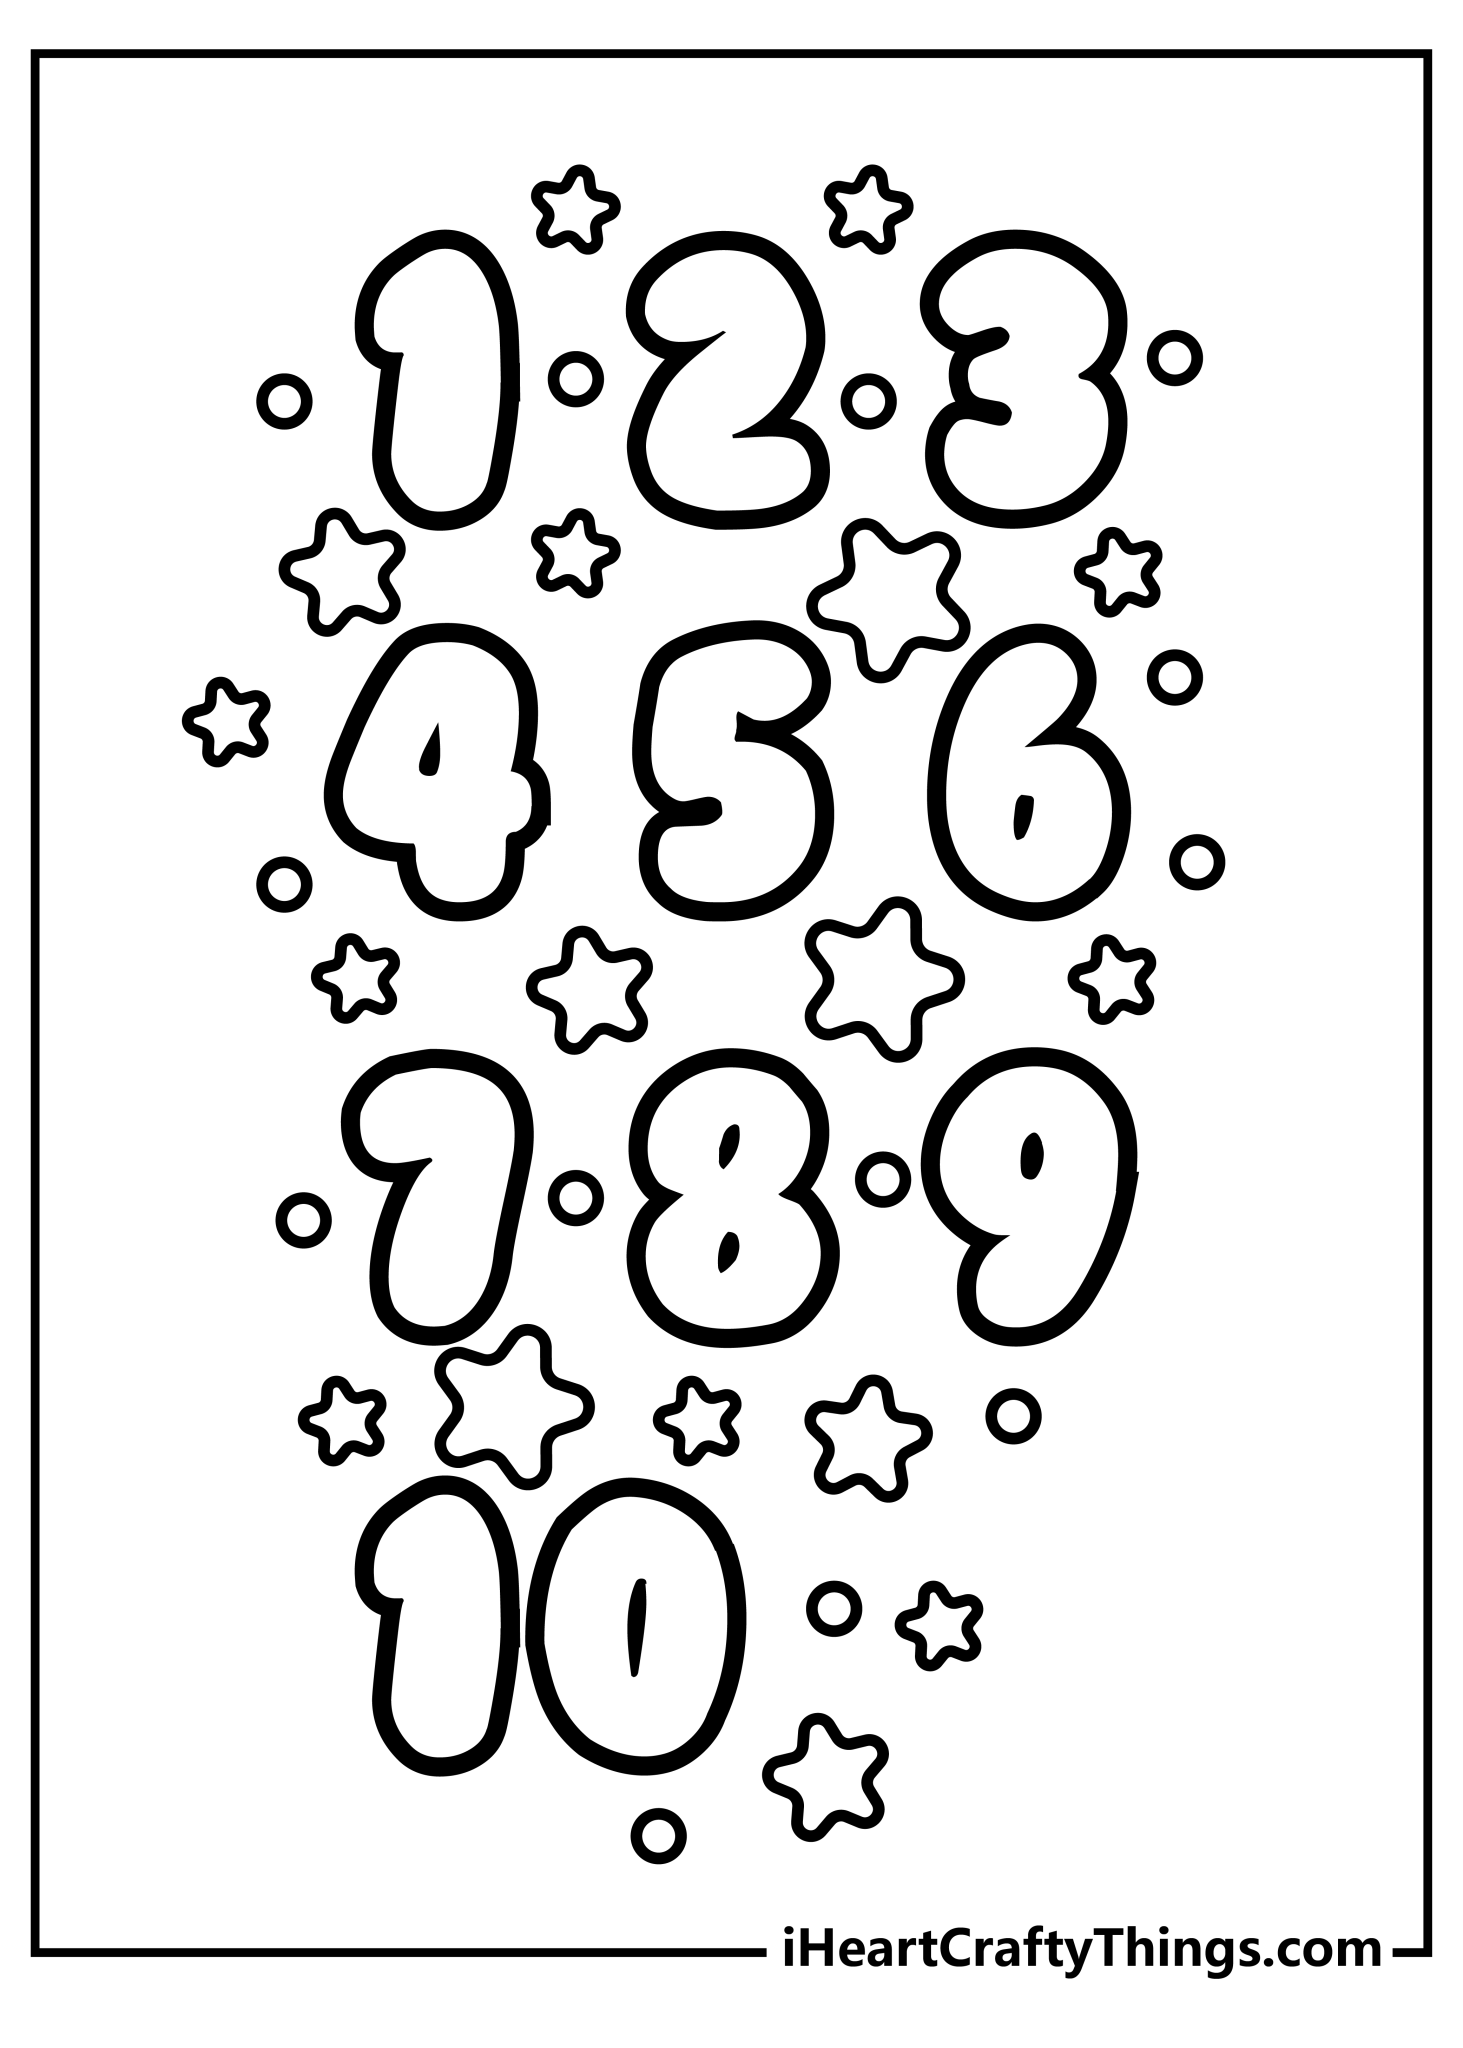 Some Number Coloring Pages